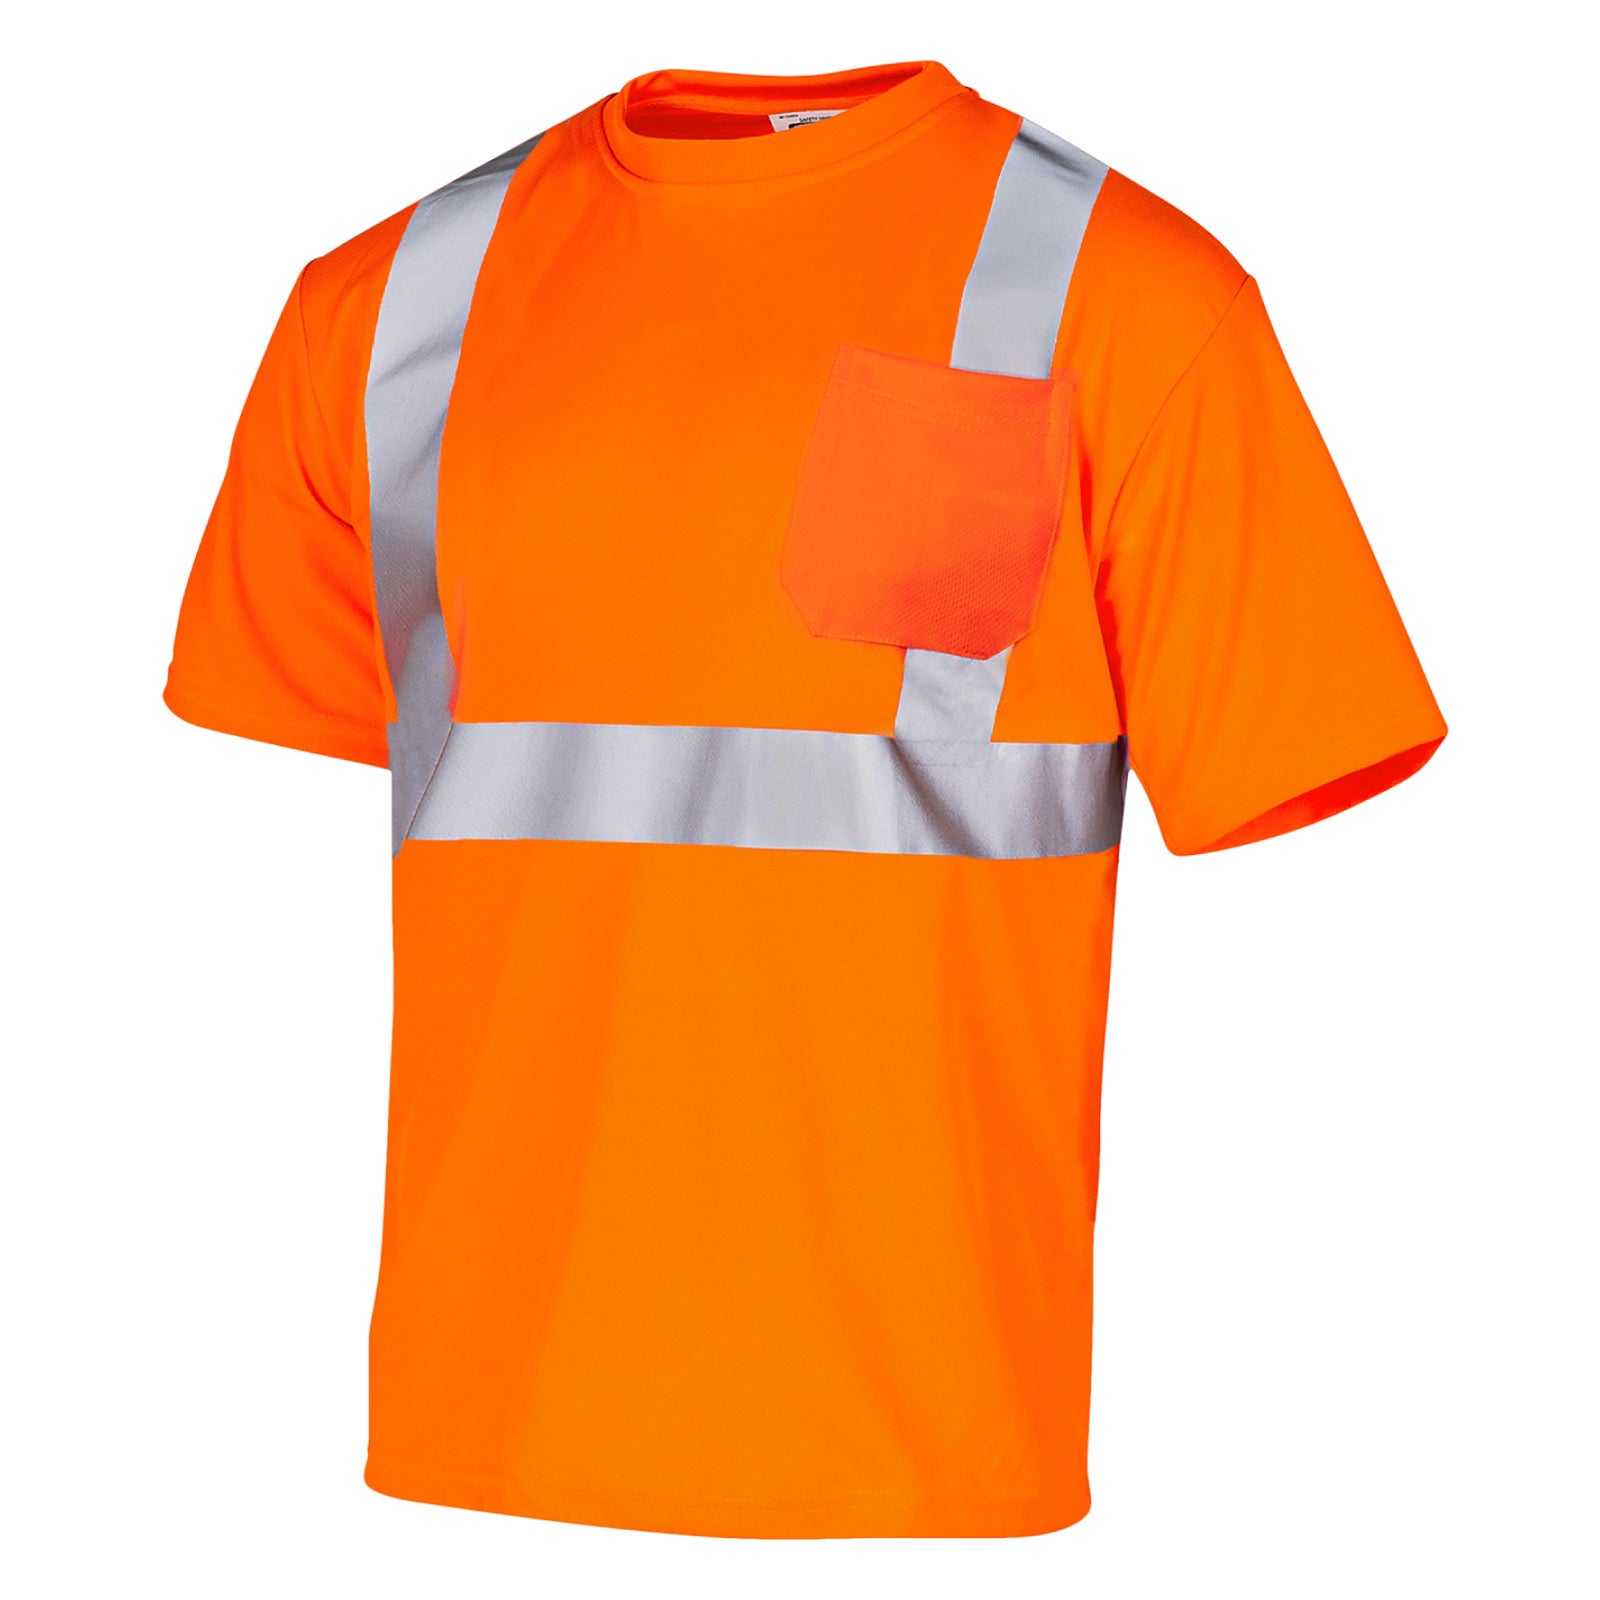 diagonal view of an orange ANSI compliant safety shirt with heat transfer reflective strips